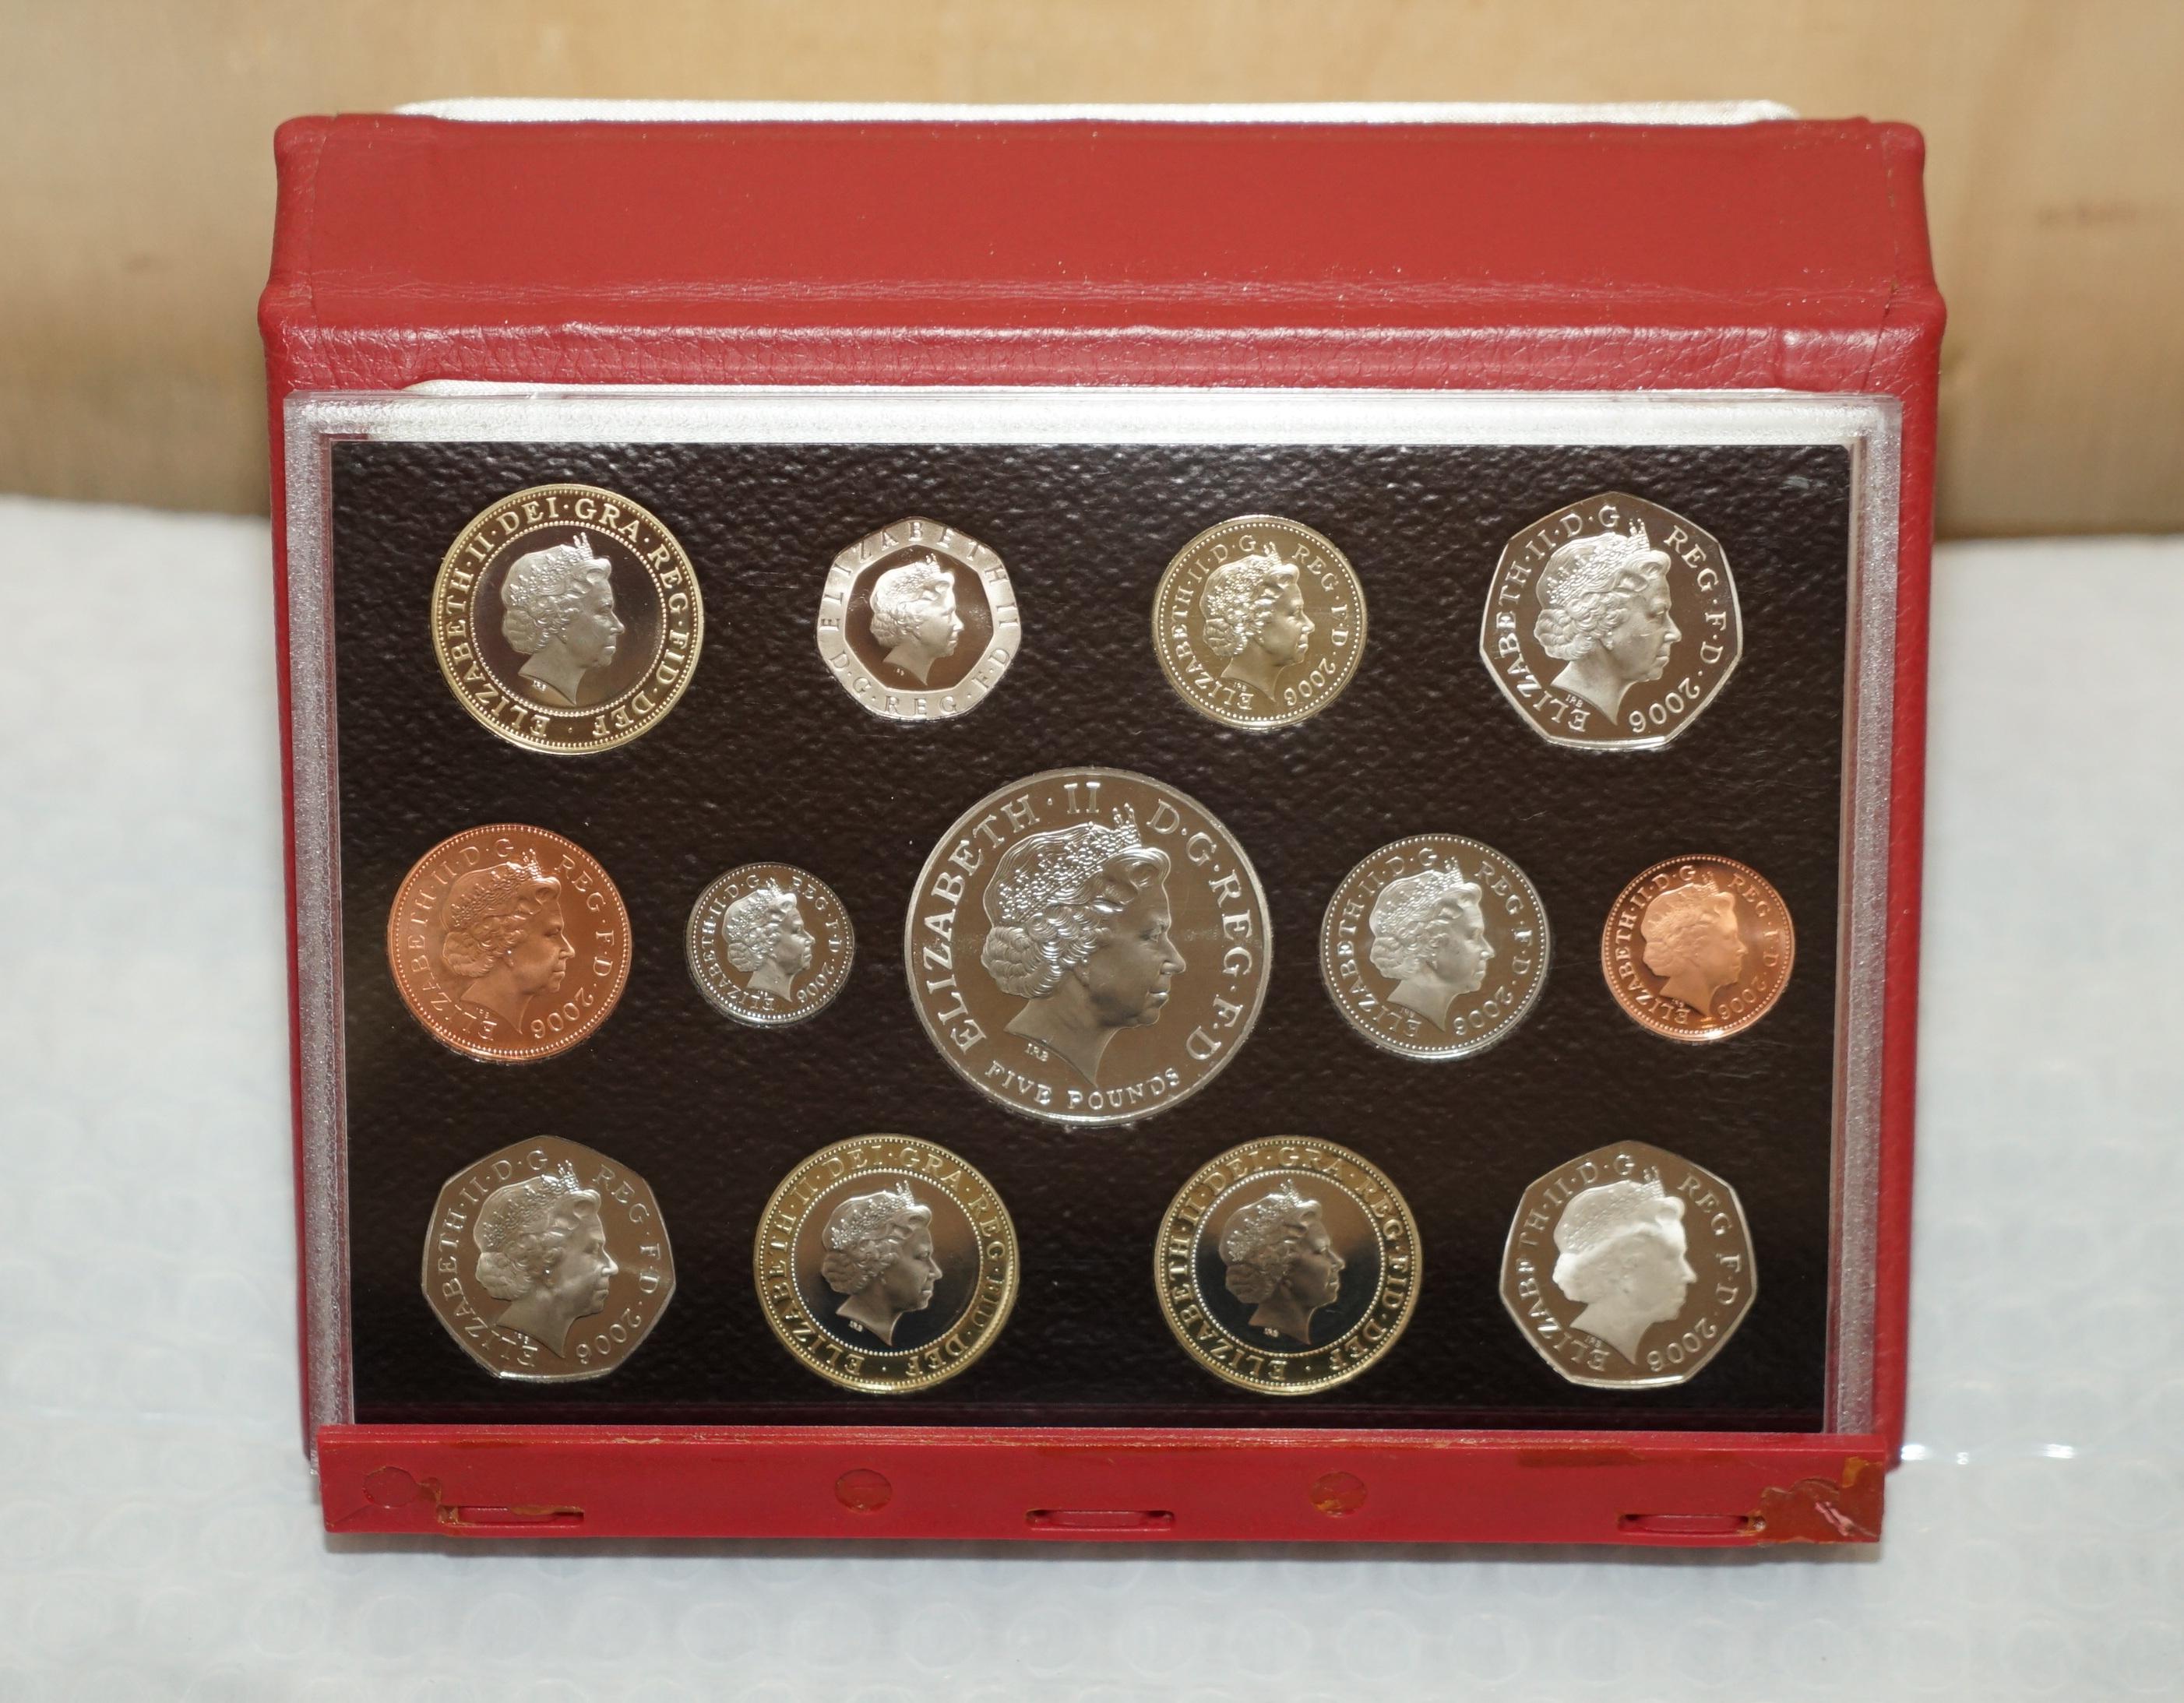 Hand-Crafted 13 Coin Royal Mint 1926, 2006 Queen Elizabeth Proof Set with £5 Vivat Regina